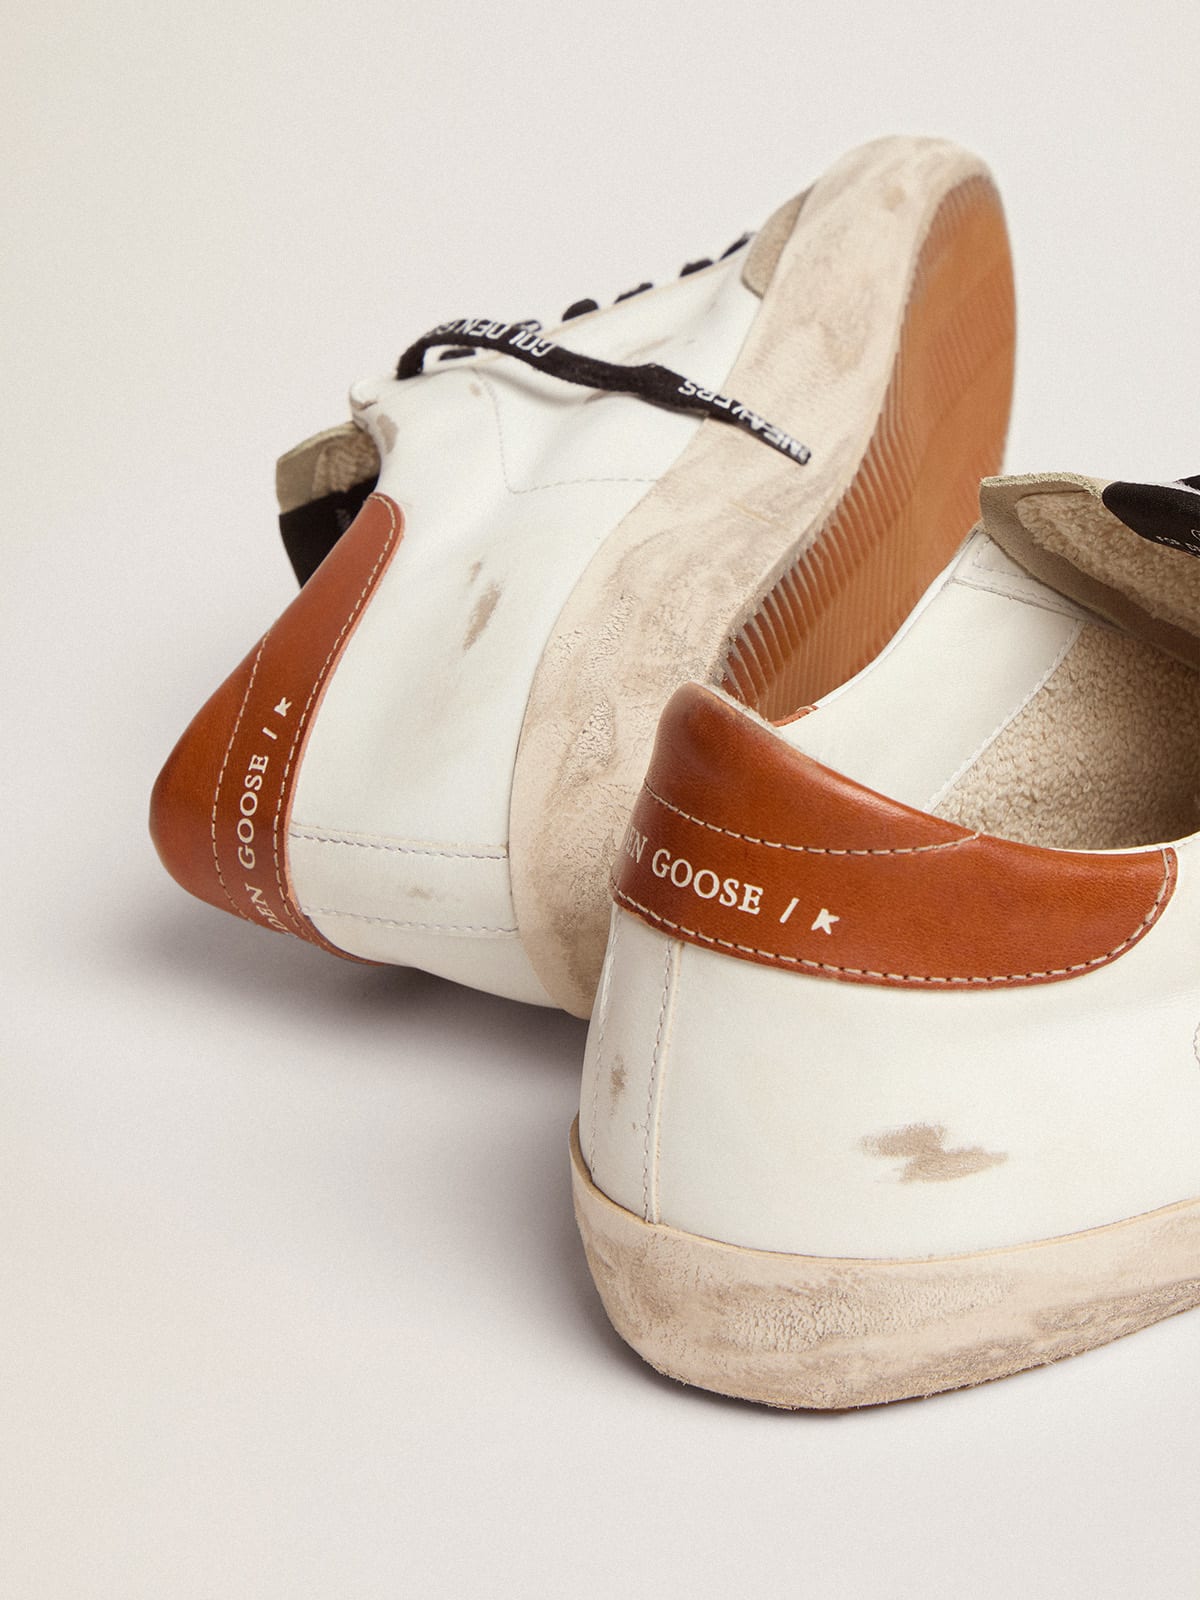 Golden Goose - Super-Star LTD sneakers with olive-green canvas star and tan leather heel tab in 